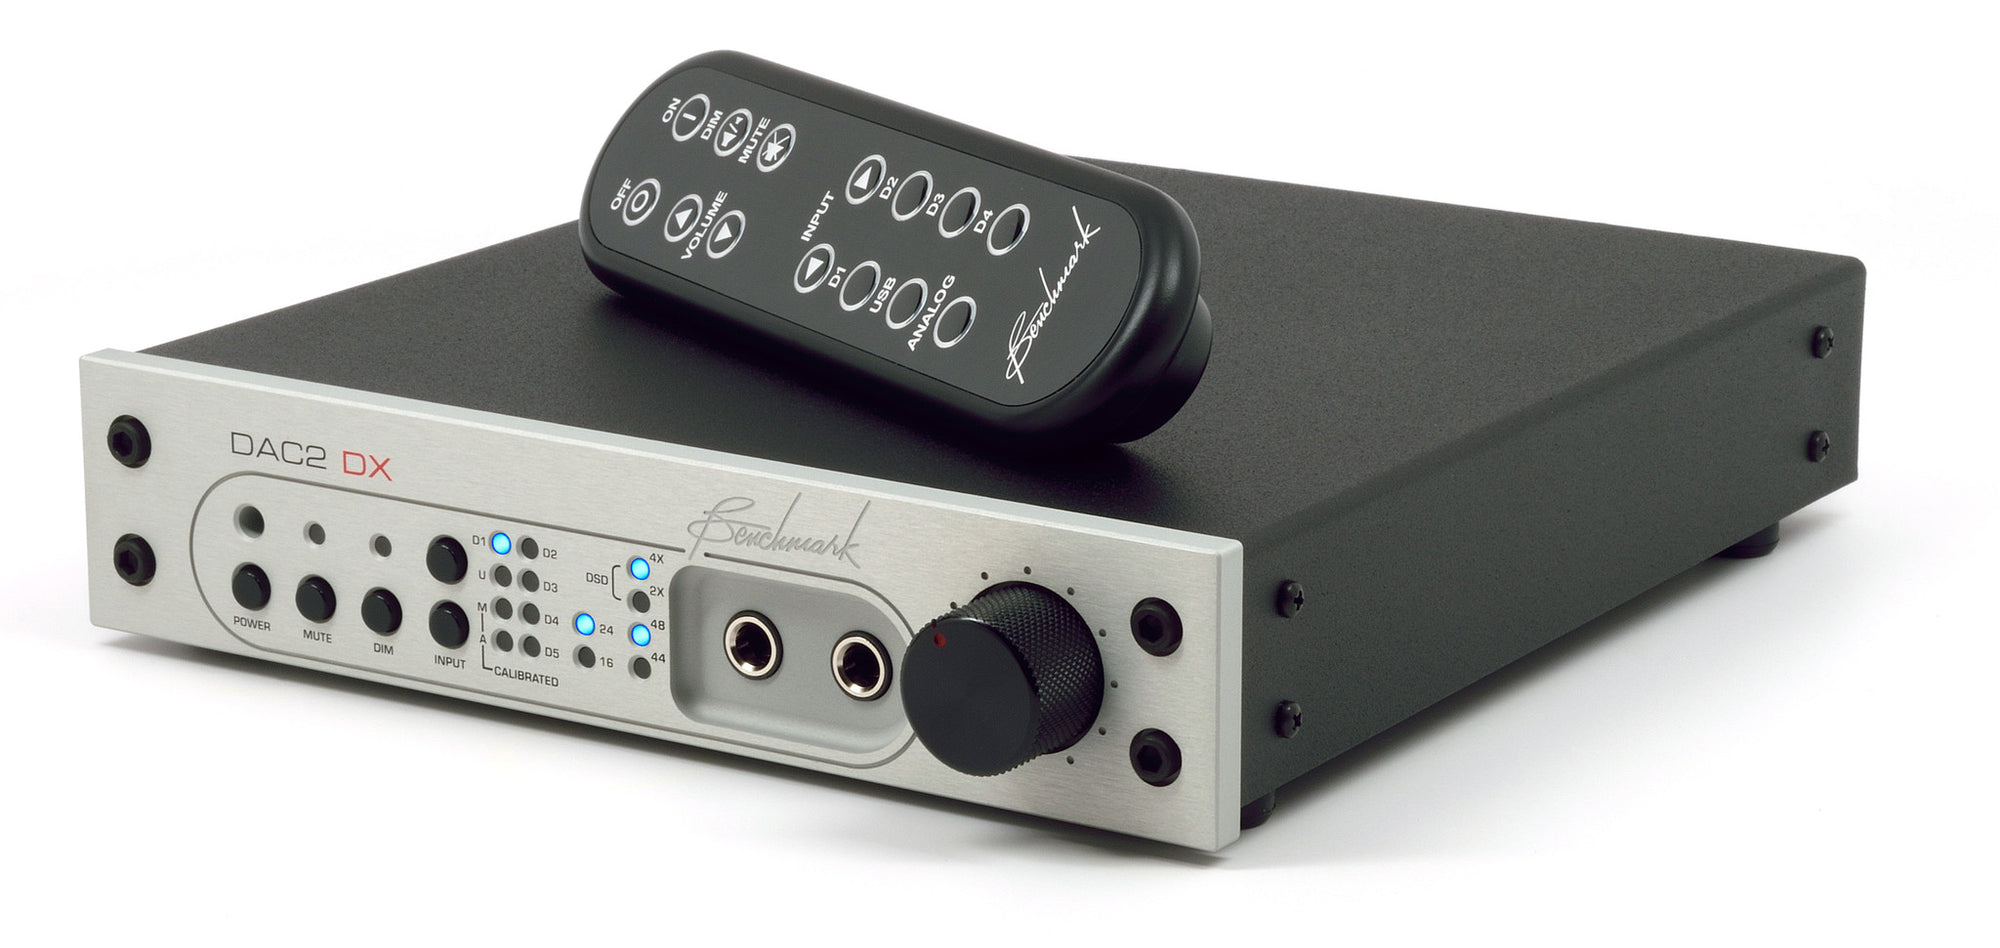 Benchmark DAC2 DX Silver with remote